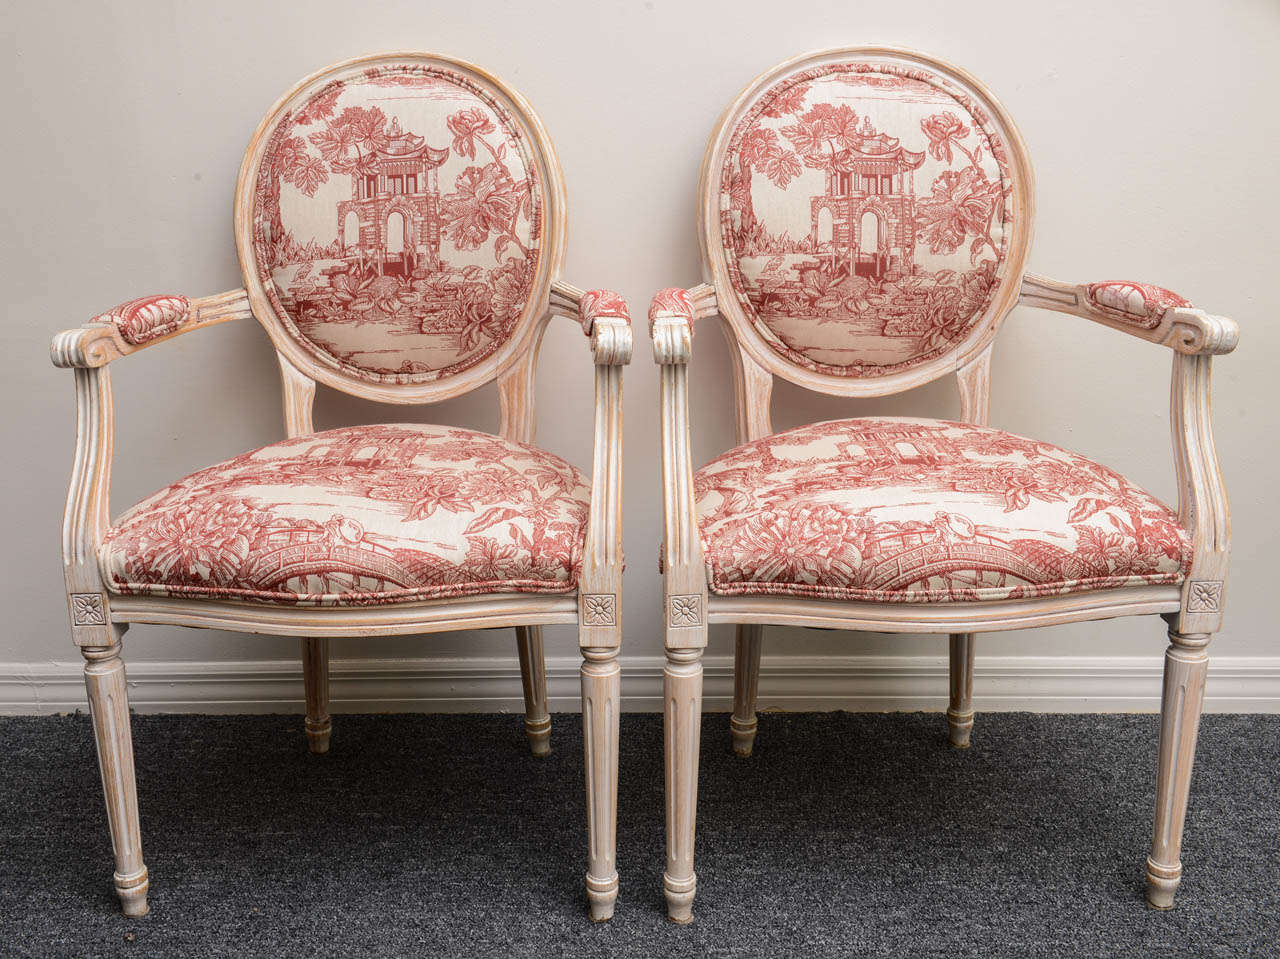 Vintage Louis XVI Style armchairs. Very comfortable and sturdy. Upholstered in a red pagoda design fabric.